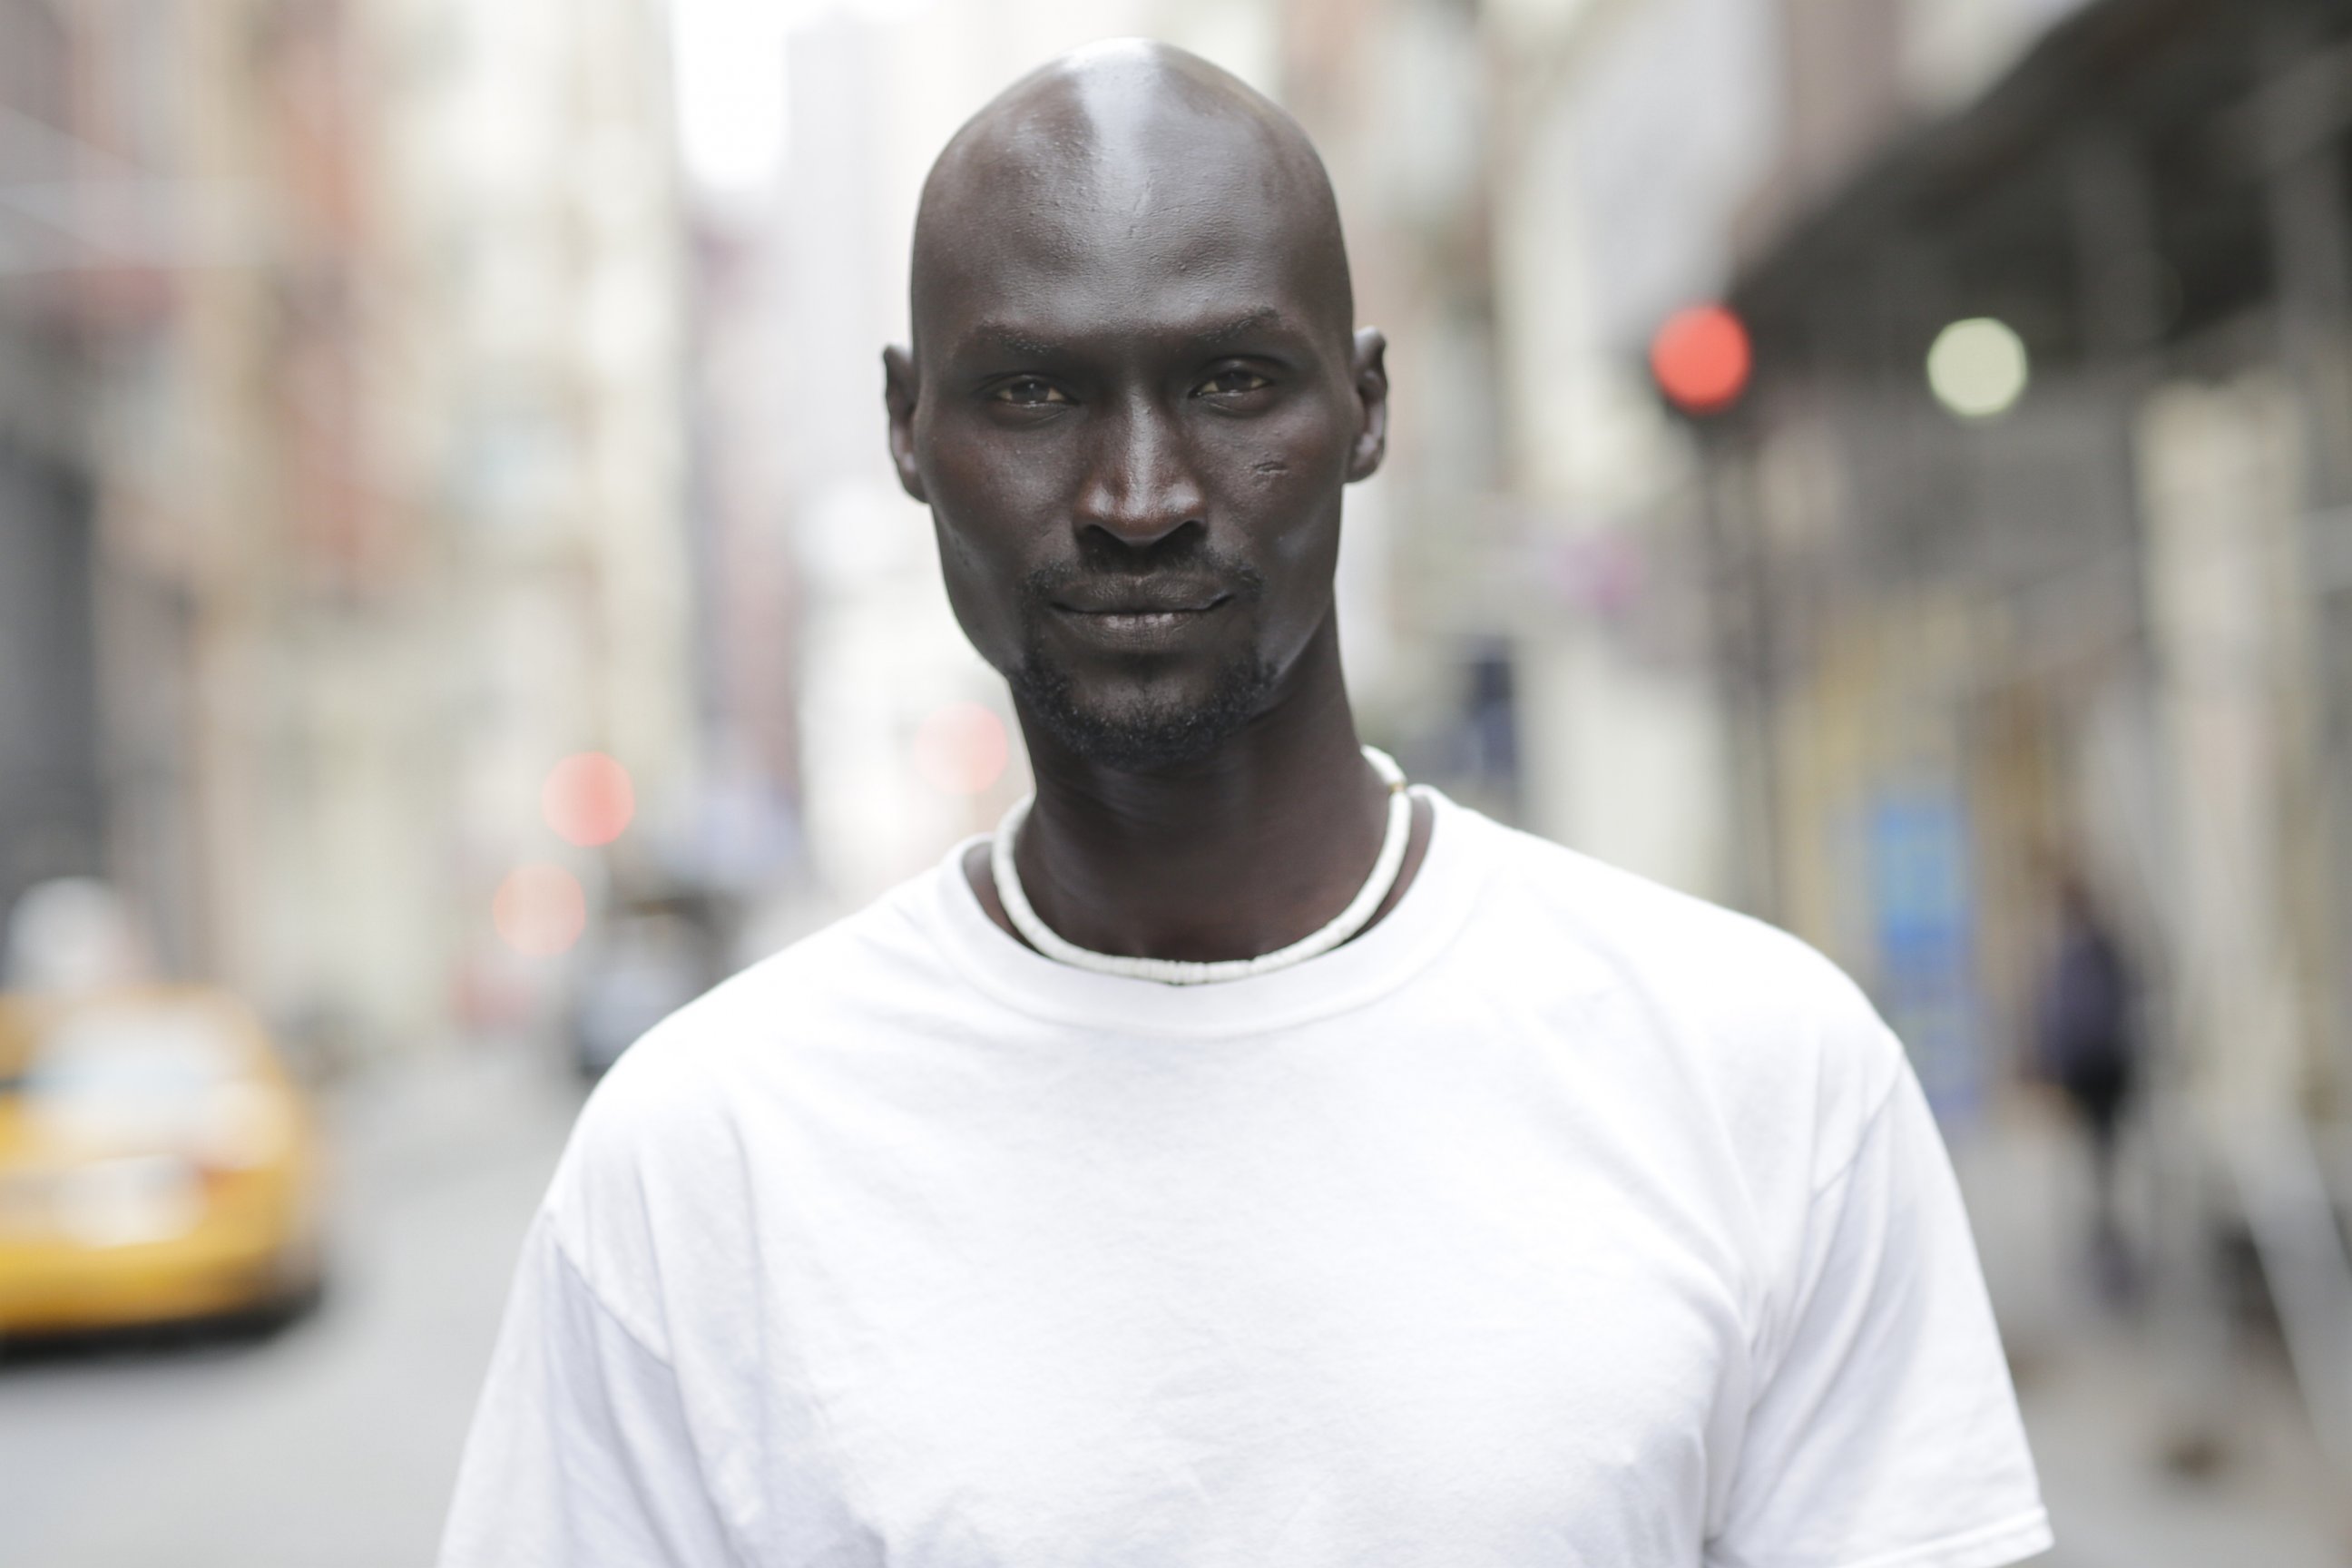 PHOTO: Ger Duany's  journey has taken him from child refugee to international fashion model and the lead in "The Good Lie."  He recently returned to Africa to search for his family in refugee camps.  